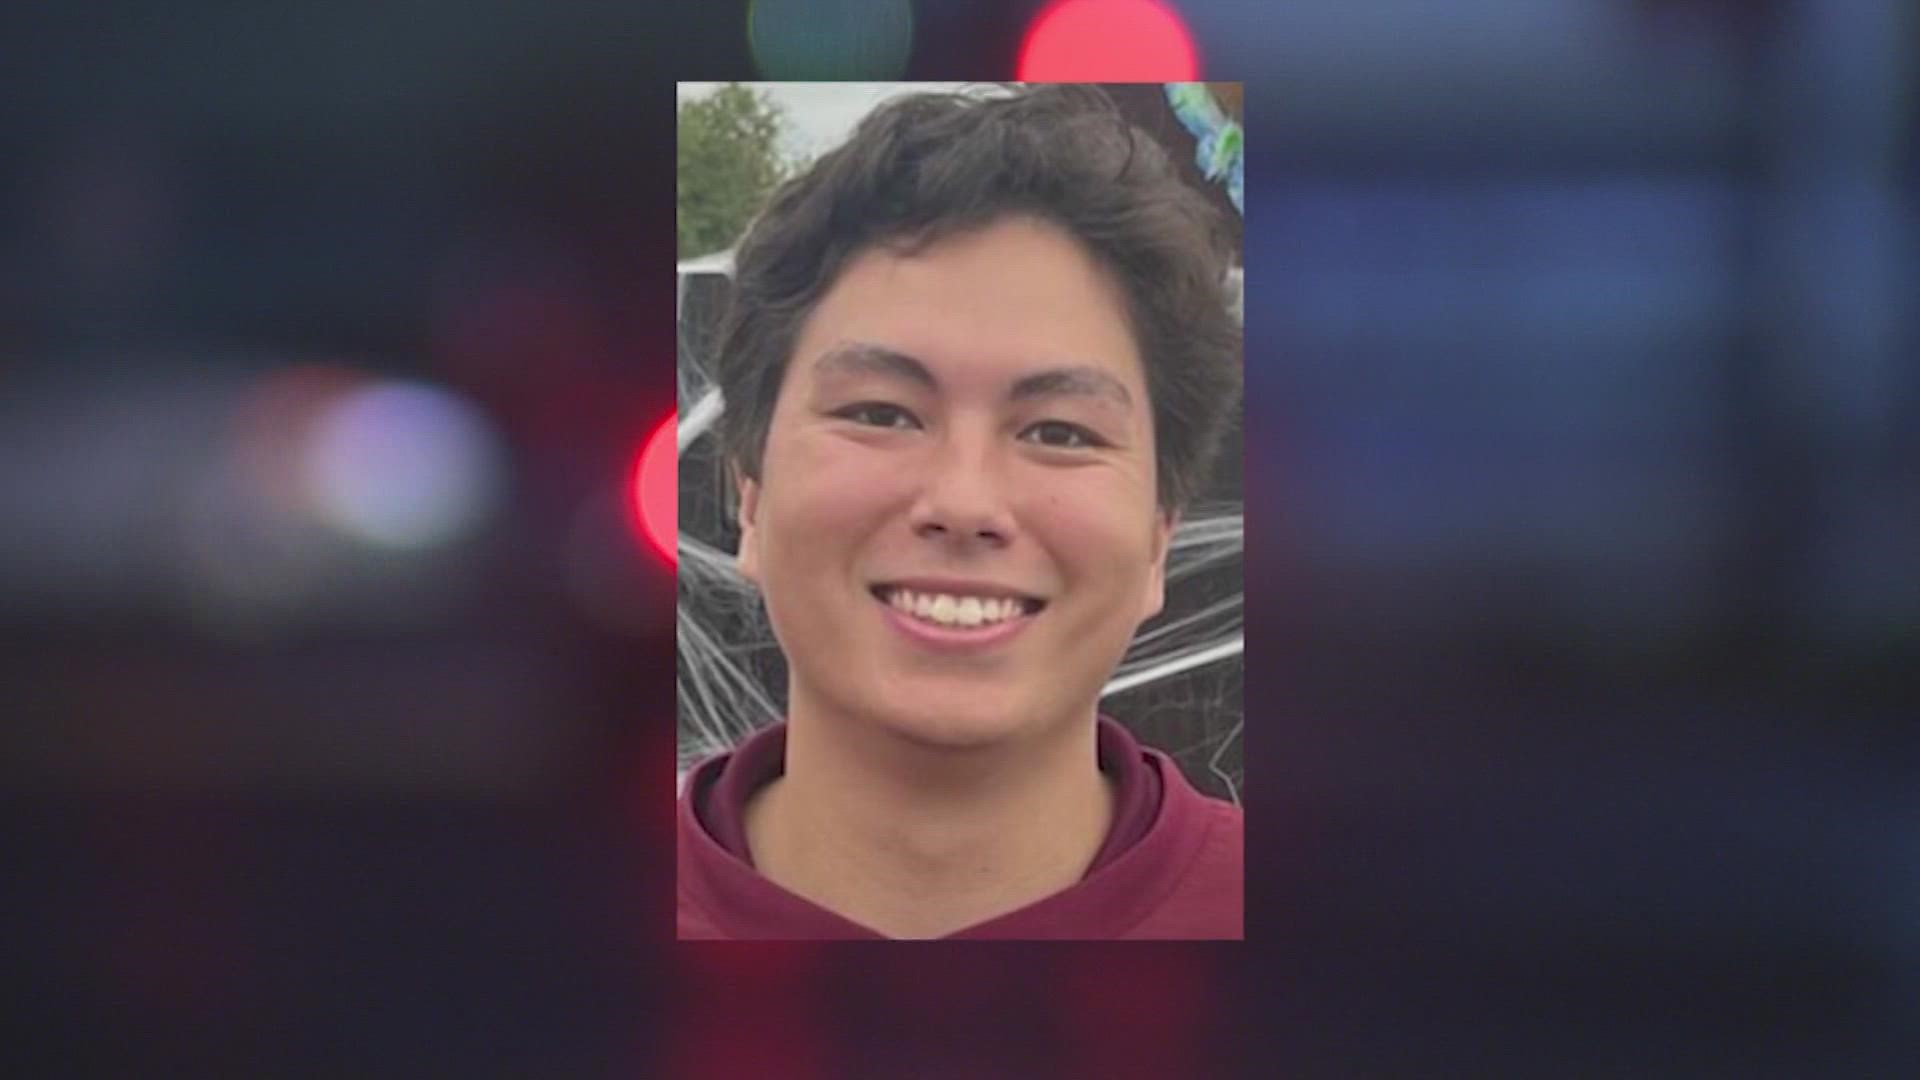 College Station police said Tanner Hoang's family was in town to attend a graduation ceremony, but that he went missing before meeting them for lunch.